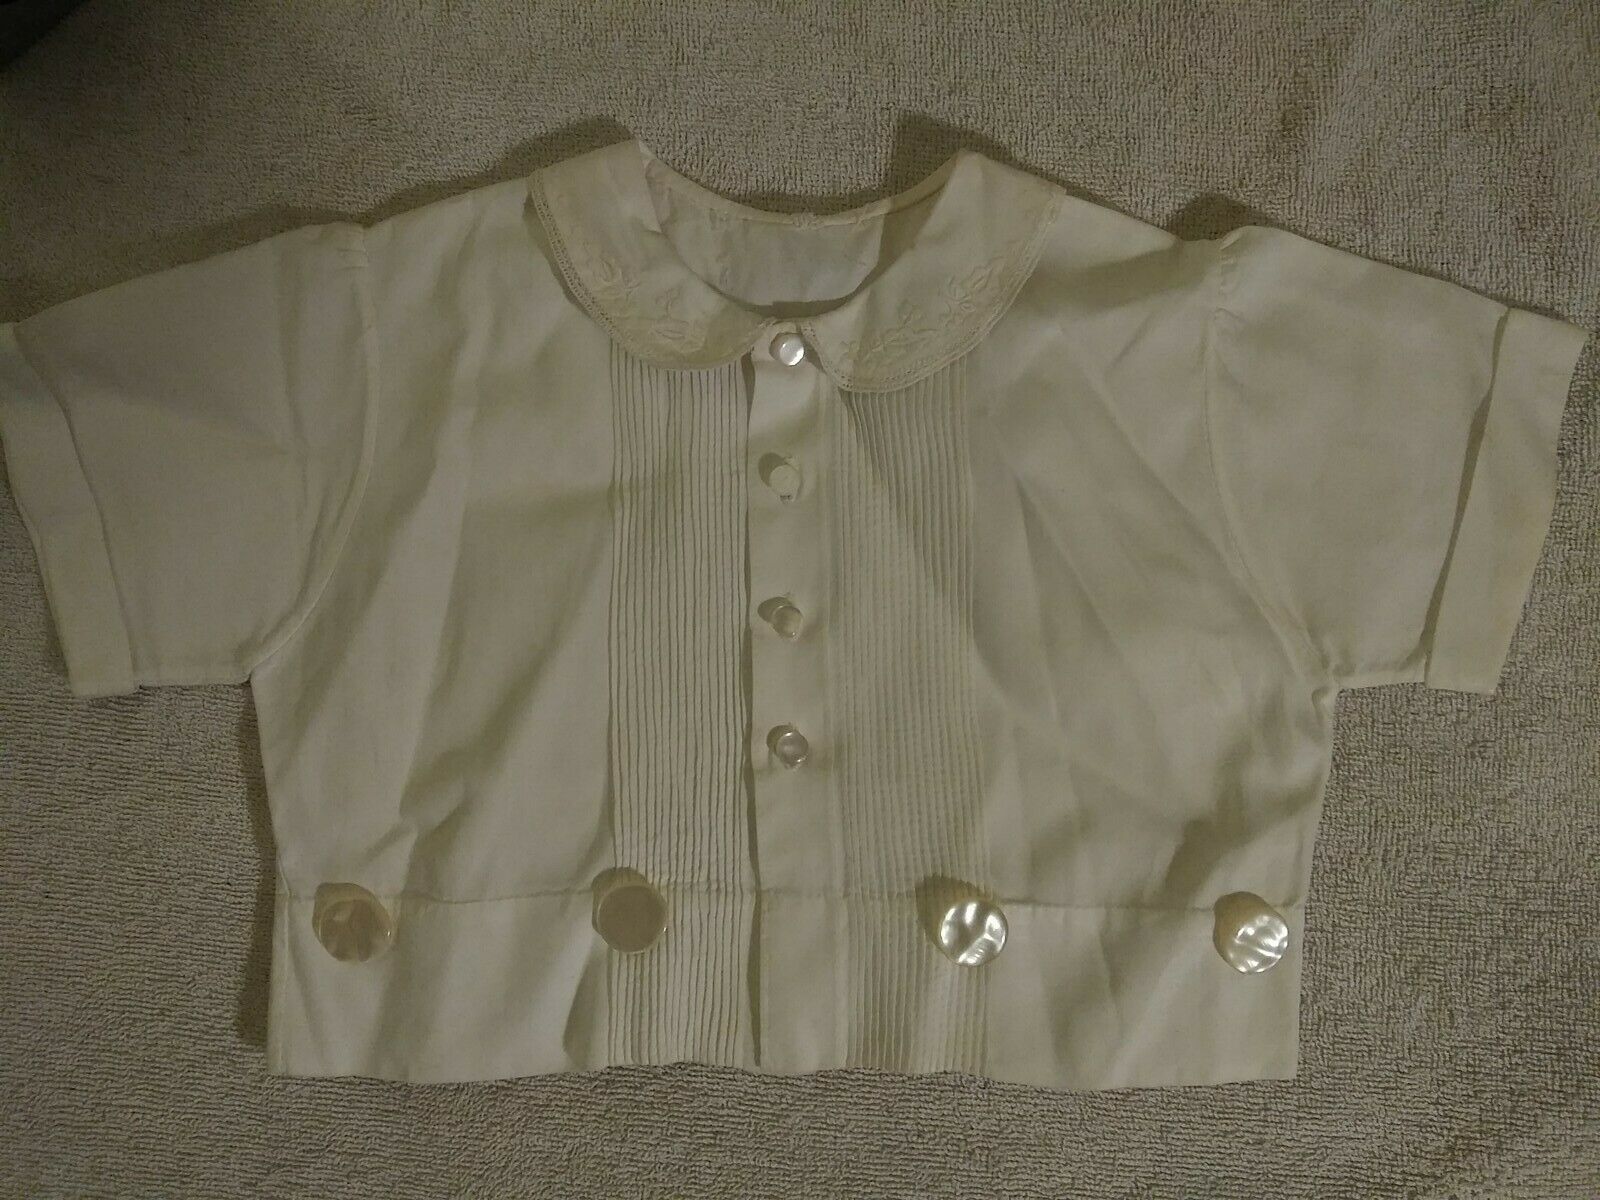 1950-60 Vintage Handmade Shirt Very Ornate White Wlace+embroidery On Collar!!!!